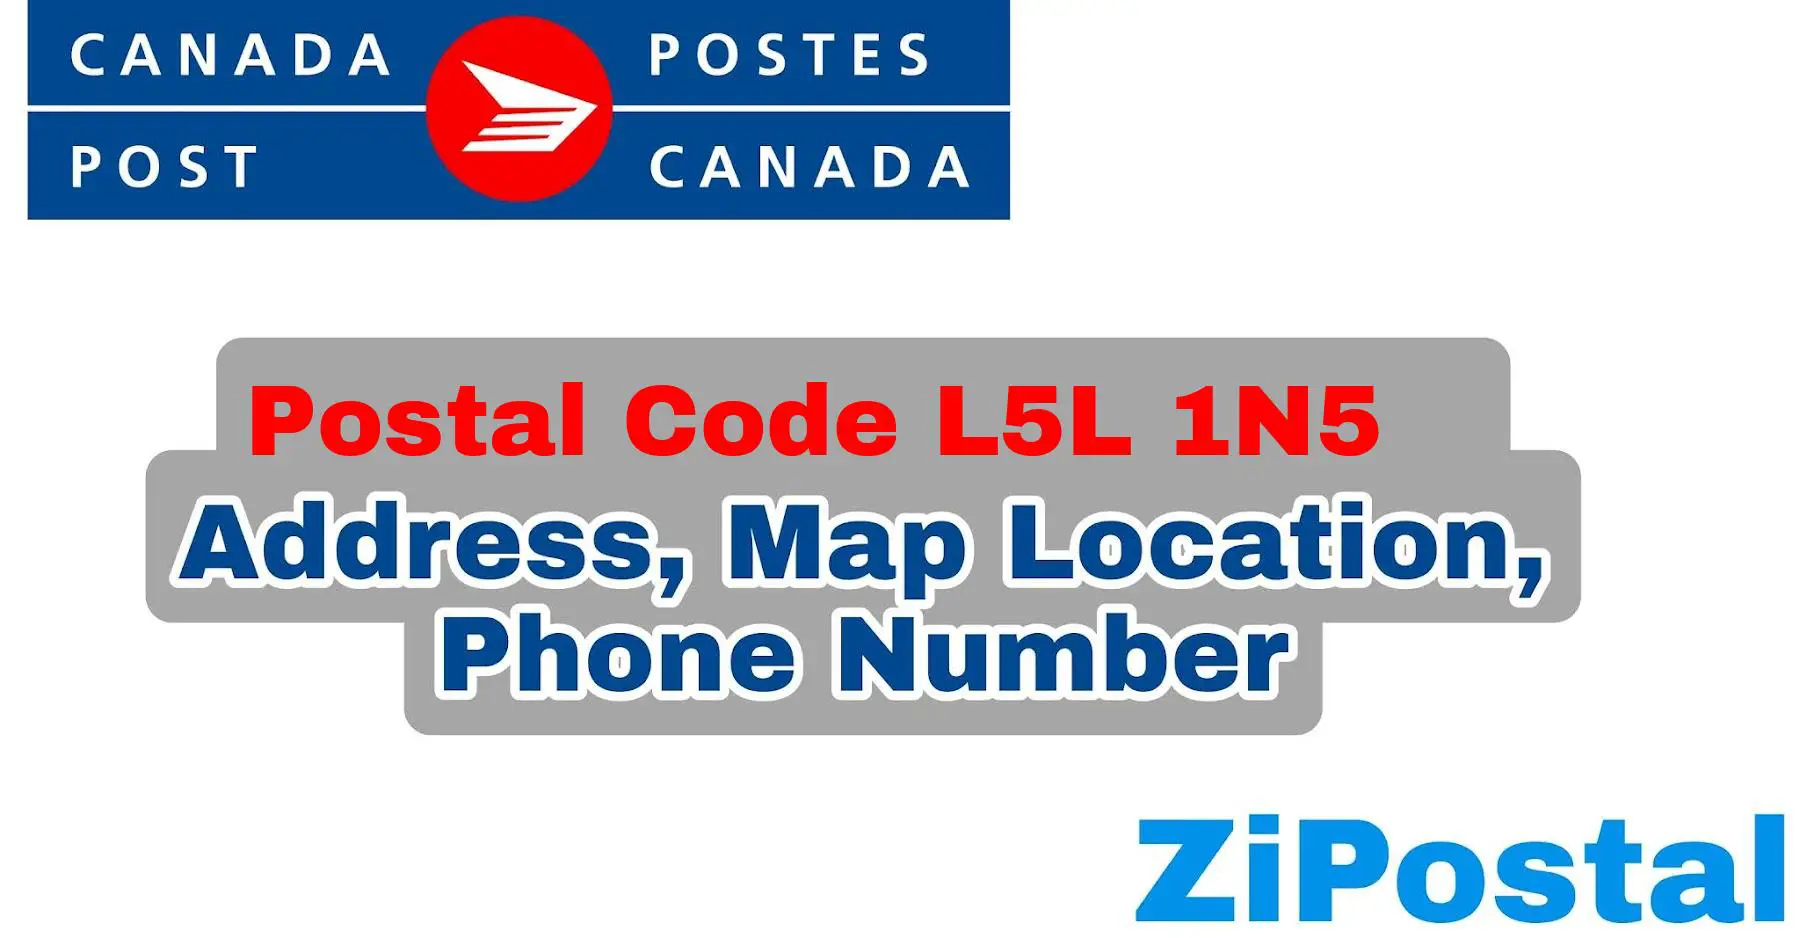 Postal Code L5L 1N5 Address Map Location and Phone Number